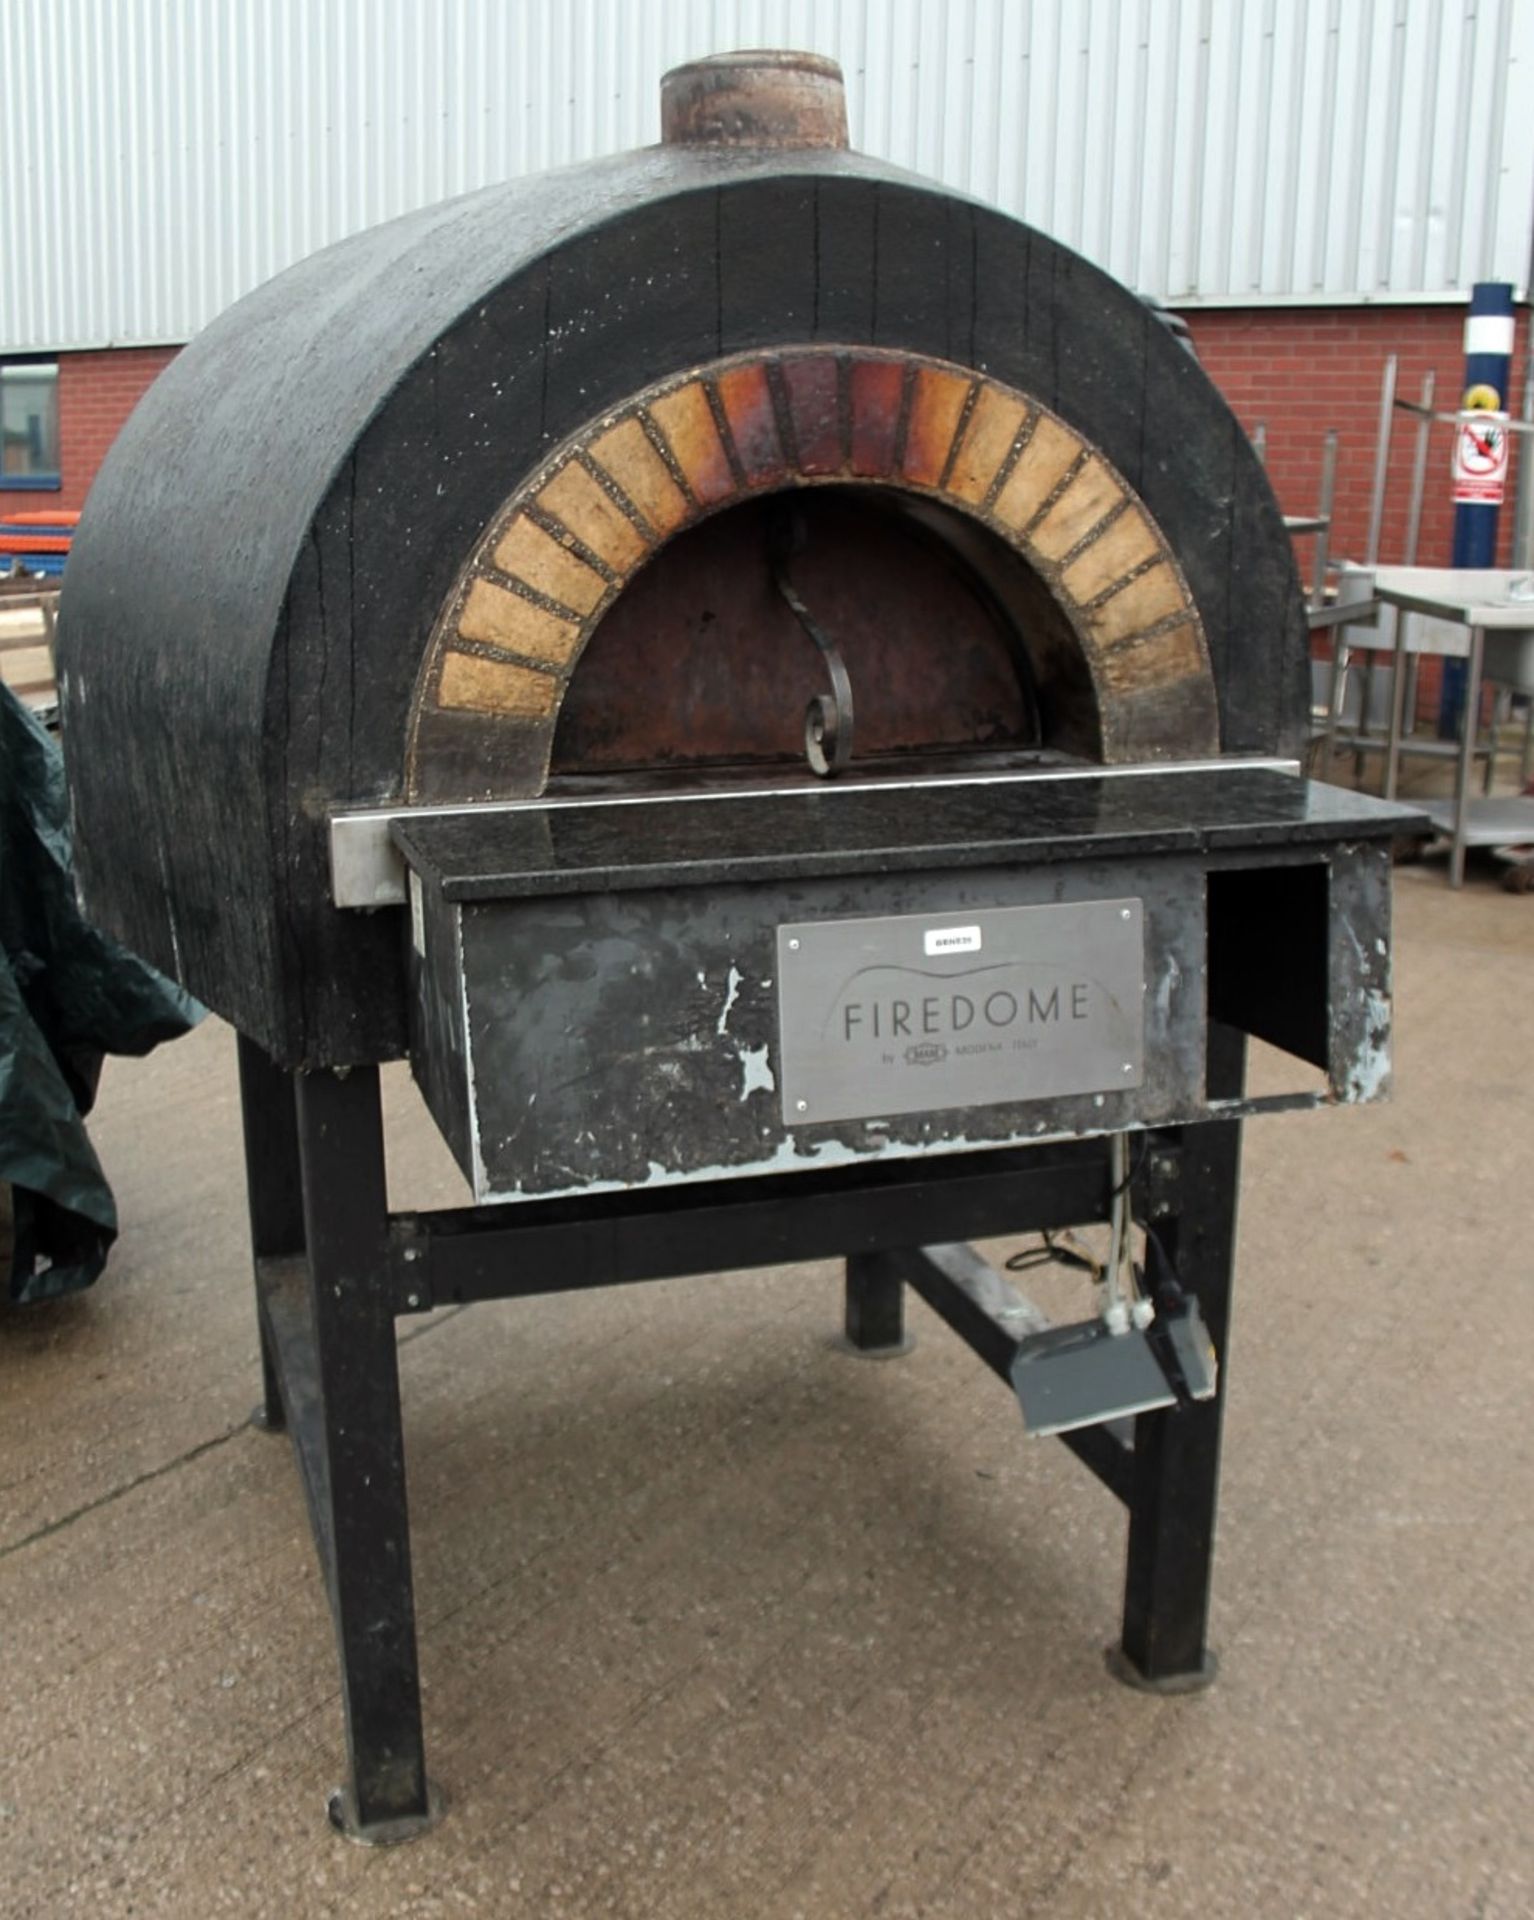 1 x MAM Firedome Commercial Stone Baked Gas Pizza Oven - Made in Italy - Type Modular Fire E - - Image 7 of 8